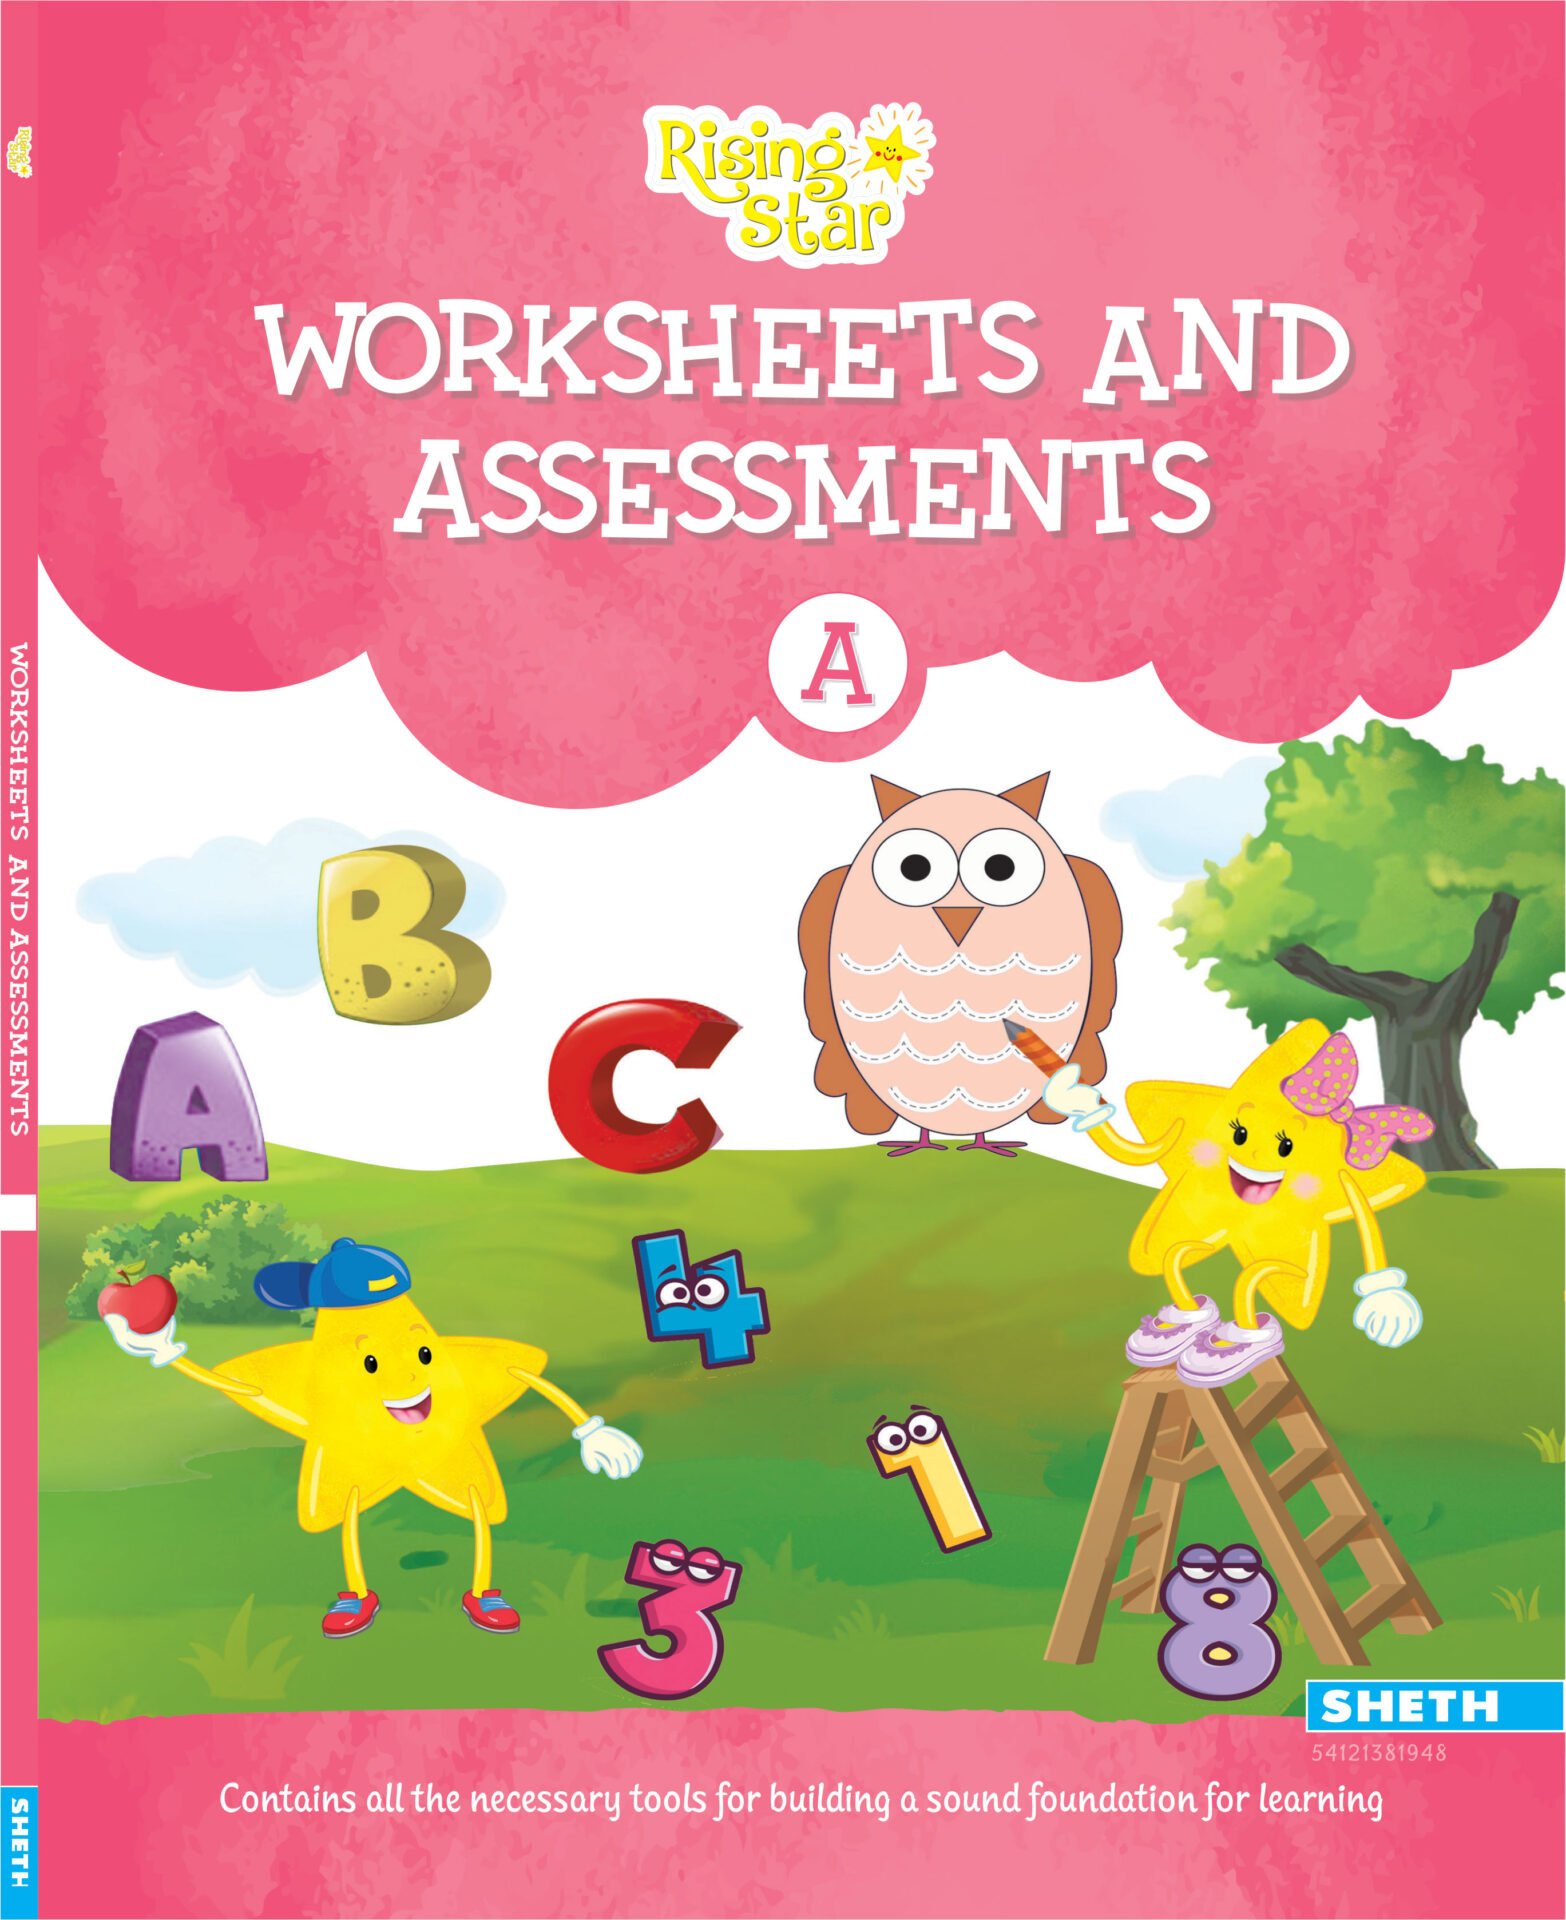 Rising Star Worksheets and Assessments A 1 1